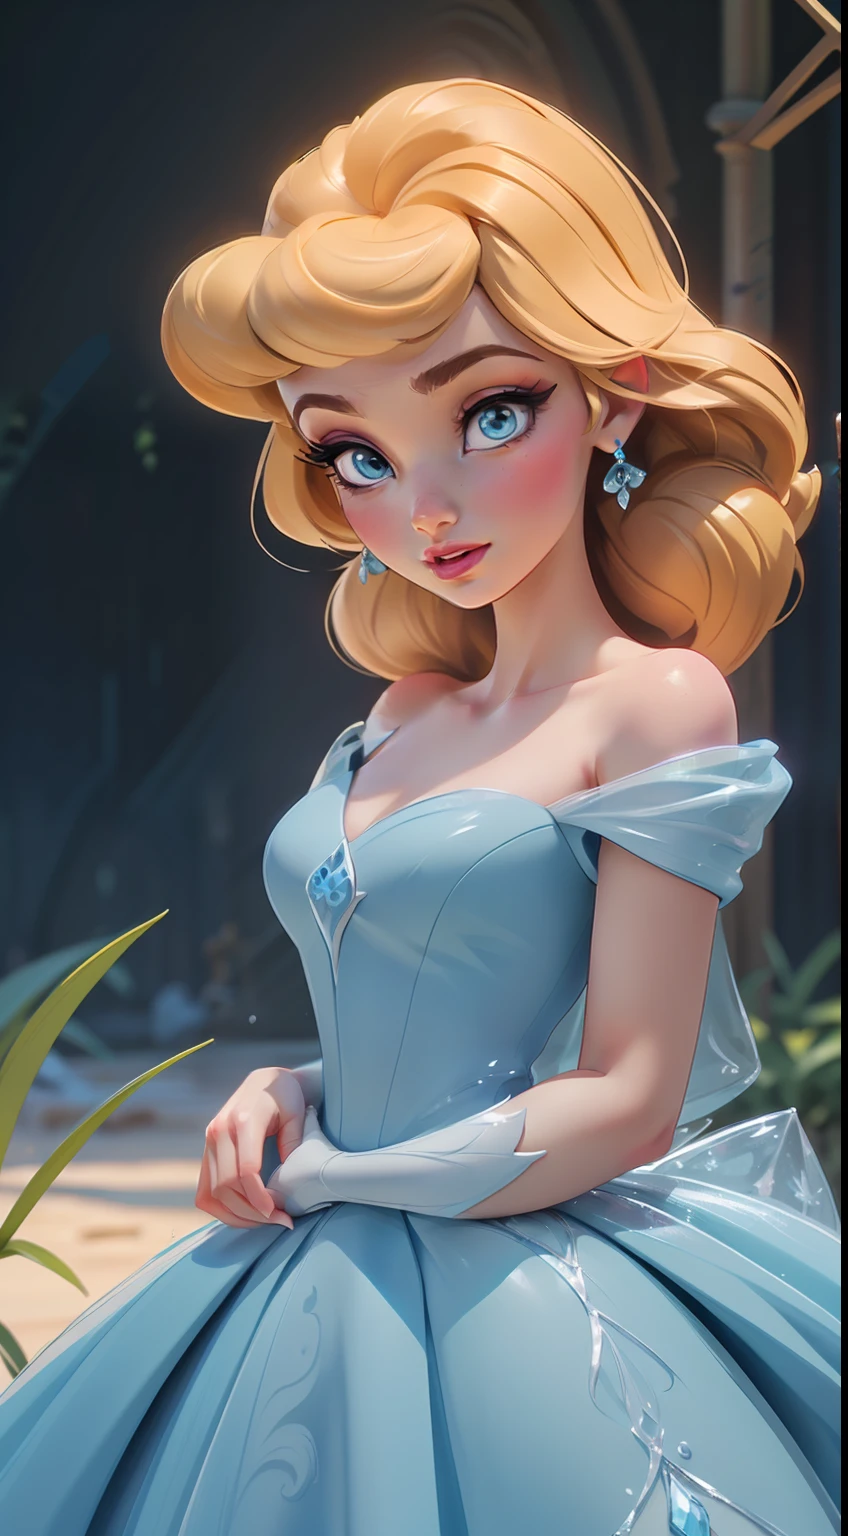 Elsa-Cinderella Fusion, Merging models, melting, Cinderella&#39;s clothes, 1girl, Beautiful, character, Woman, female, (master part:1.2), (best qualityer:1.2), (standing alone:1.2), ((struggling pose)), ((field of battle)), cinemactic, perfects eyes, perfect  skin, perfect lighting, sorrido, Lumiere, Farbe, texturized skin, detail, Beauthfull, wonder wonder wonder wonder wonder wonder wonder wonder wonder wonder wonder wonder wonder wonder wonder wonder wonder wonder wonder wonder wonder wonder wonder wonder wonder wonder wonder wonder wonder wonder wonder wonder, ultra detali, face perfect